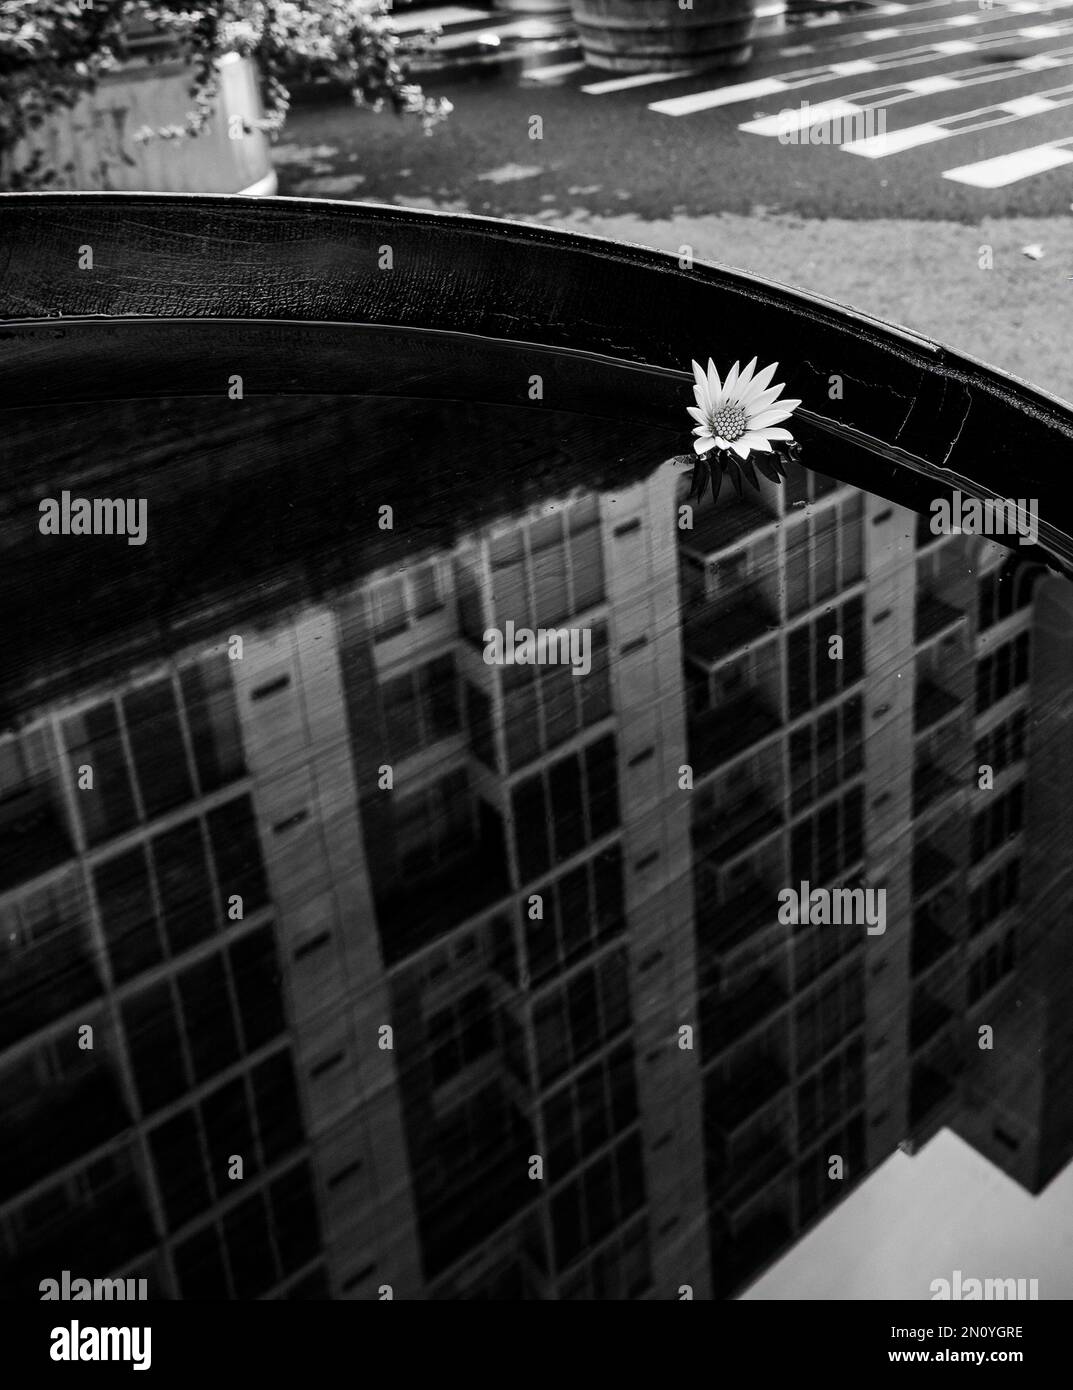 Reflection of a building in a body of water with a floating daisy Stock Photo